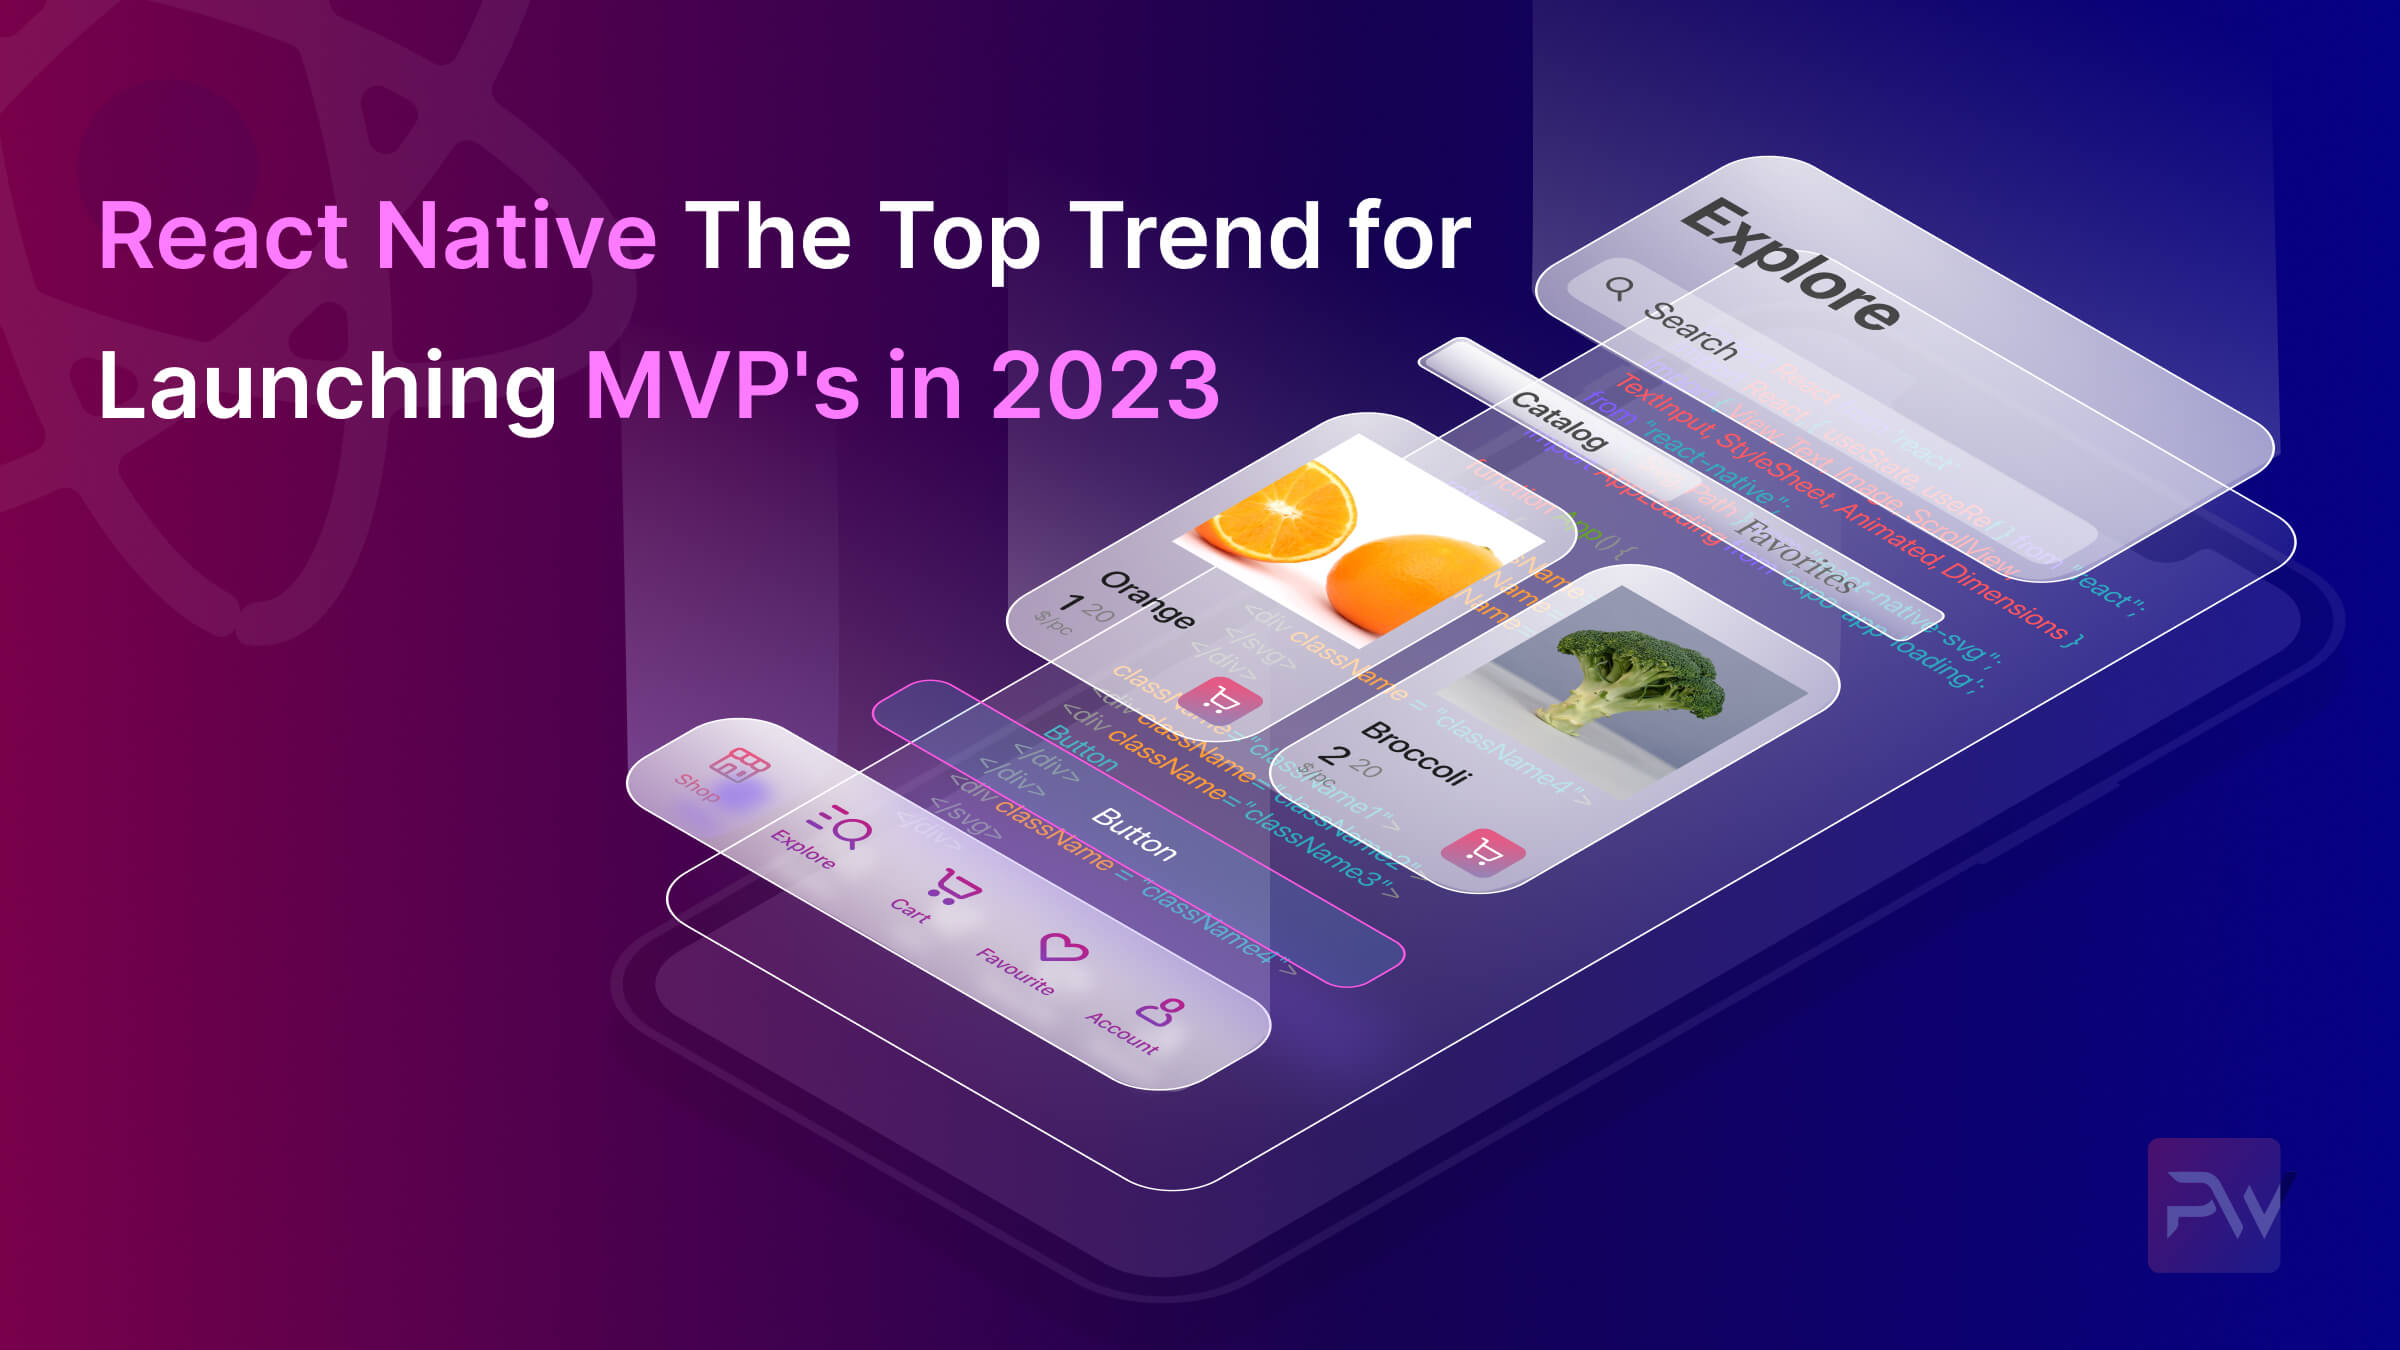 React Native The Top Trend for Launching MVPs in 2023